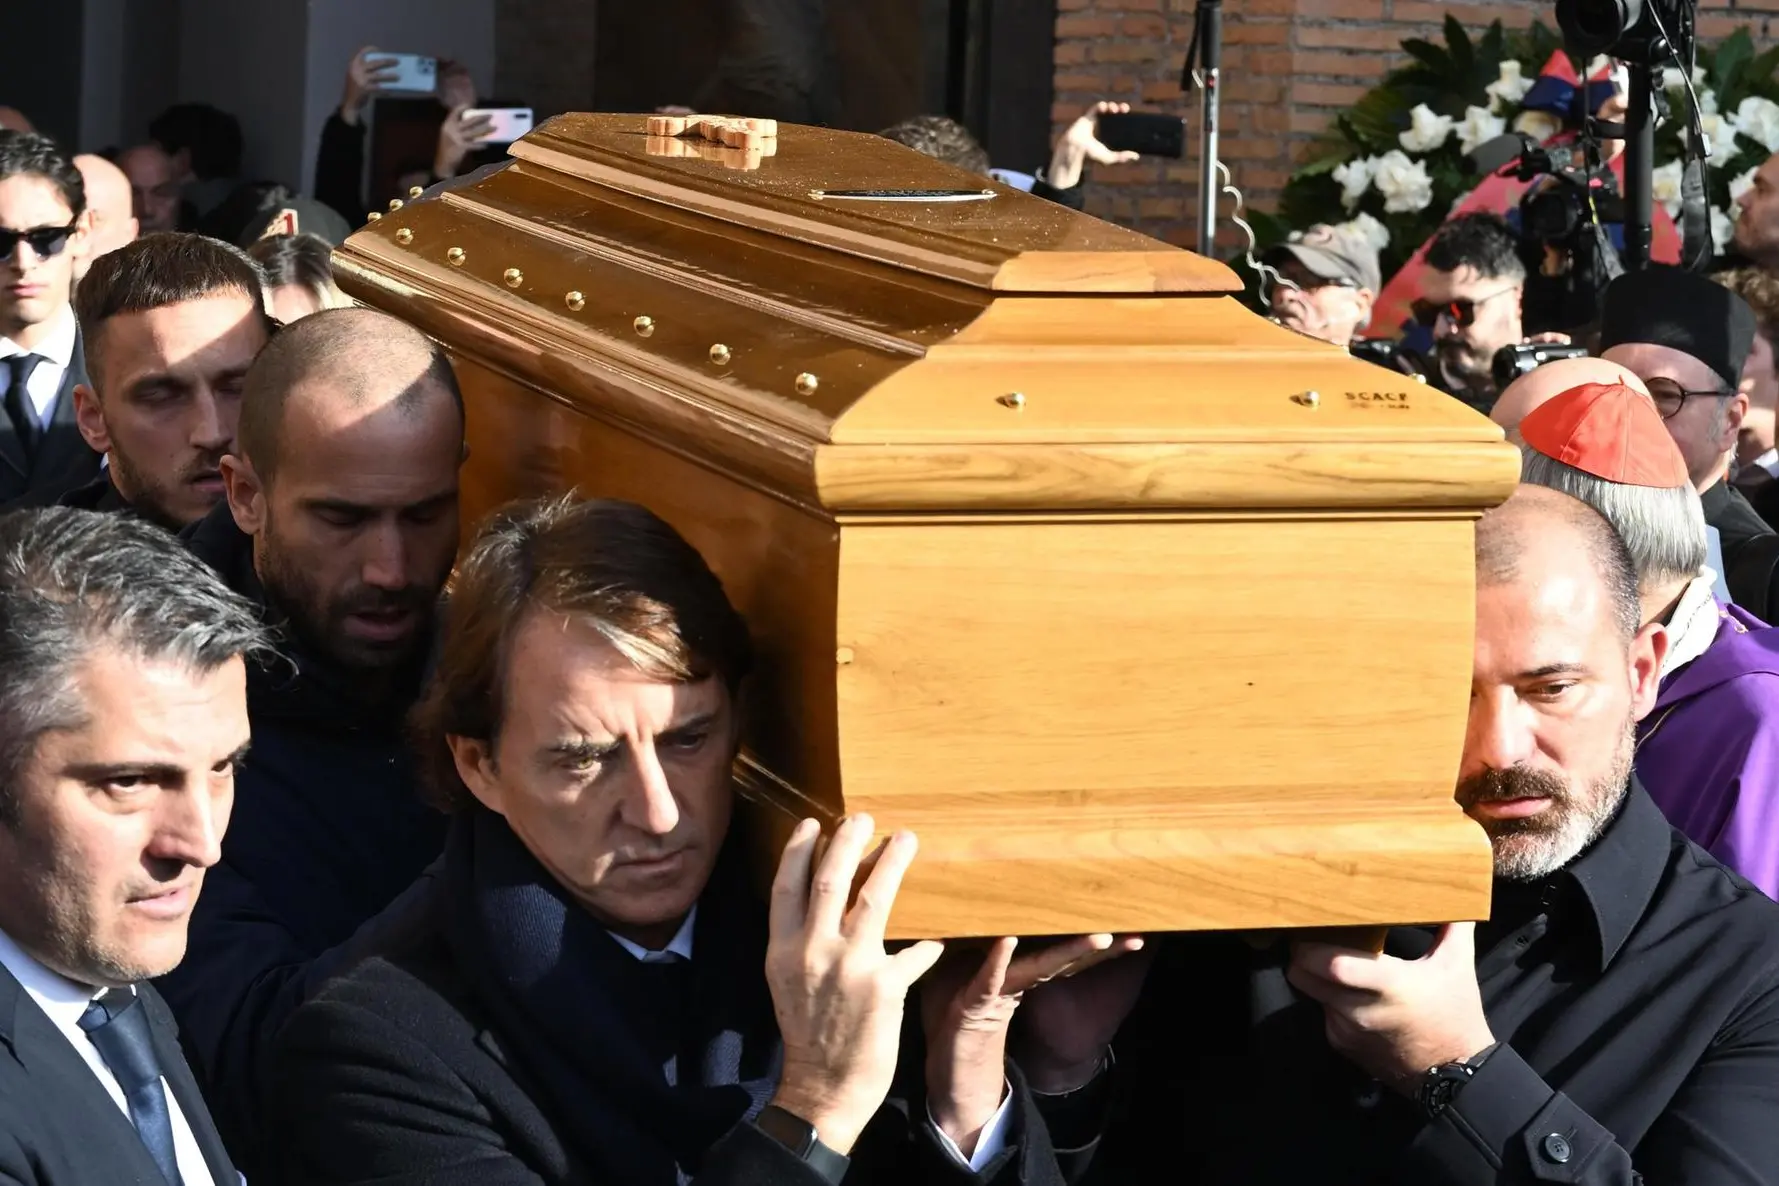 The coffin as he leaves the church at the end of funerals ceremony of Sinisa Mihajlovic at Santa Maria degli Angeli in Rome, 19 December 2022. ANSA/CLAUDIO PERI